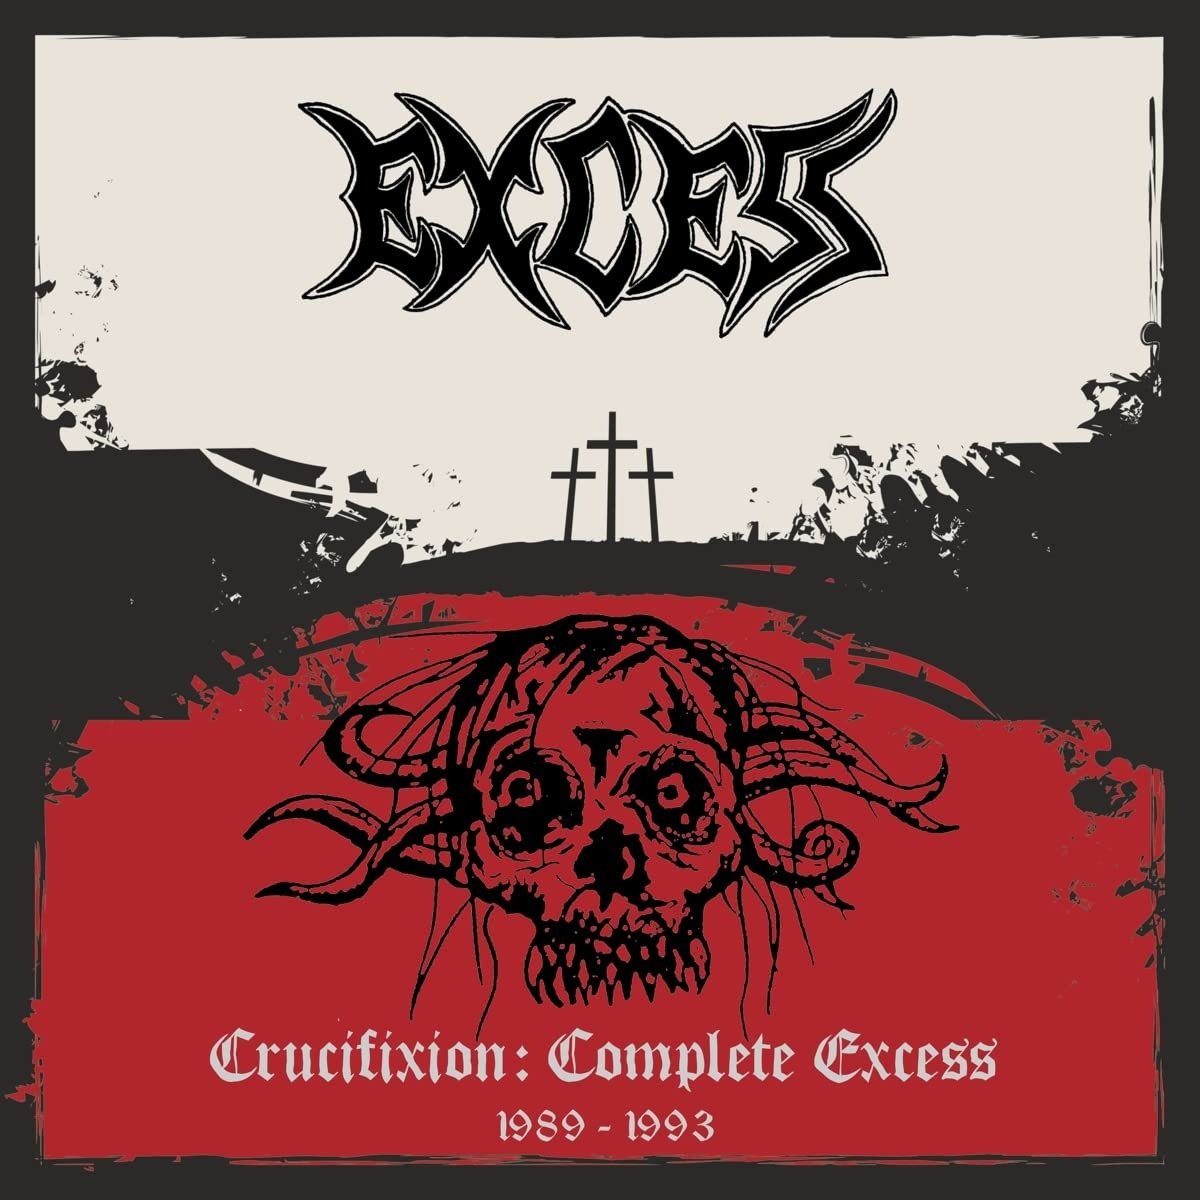 CD Shop - EXCESS CRUCIFIXION: COMPLETE EXCESS